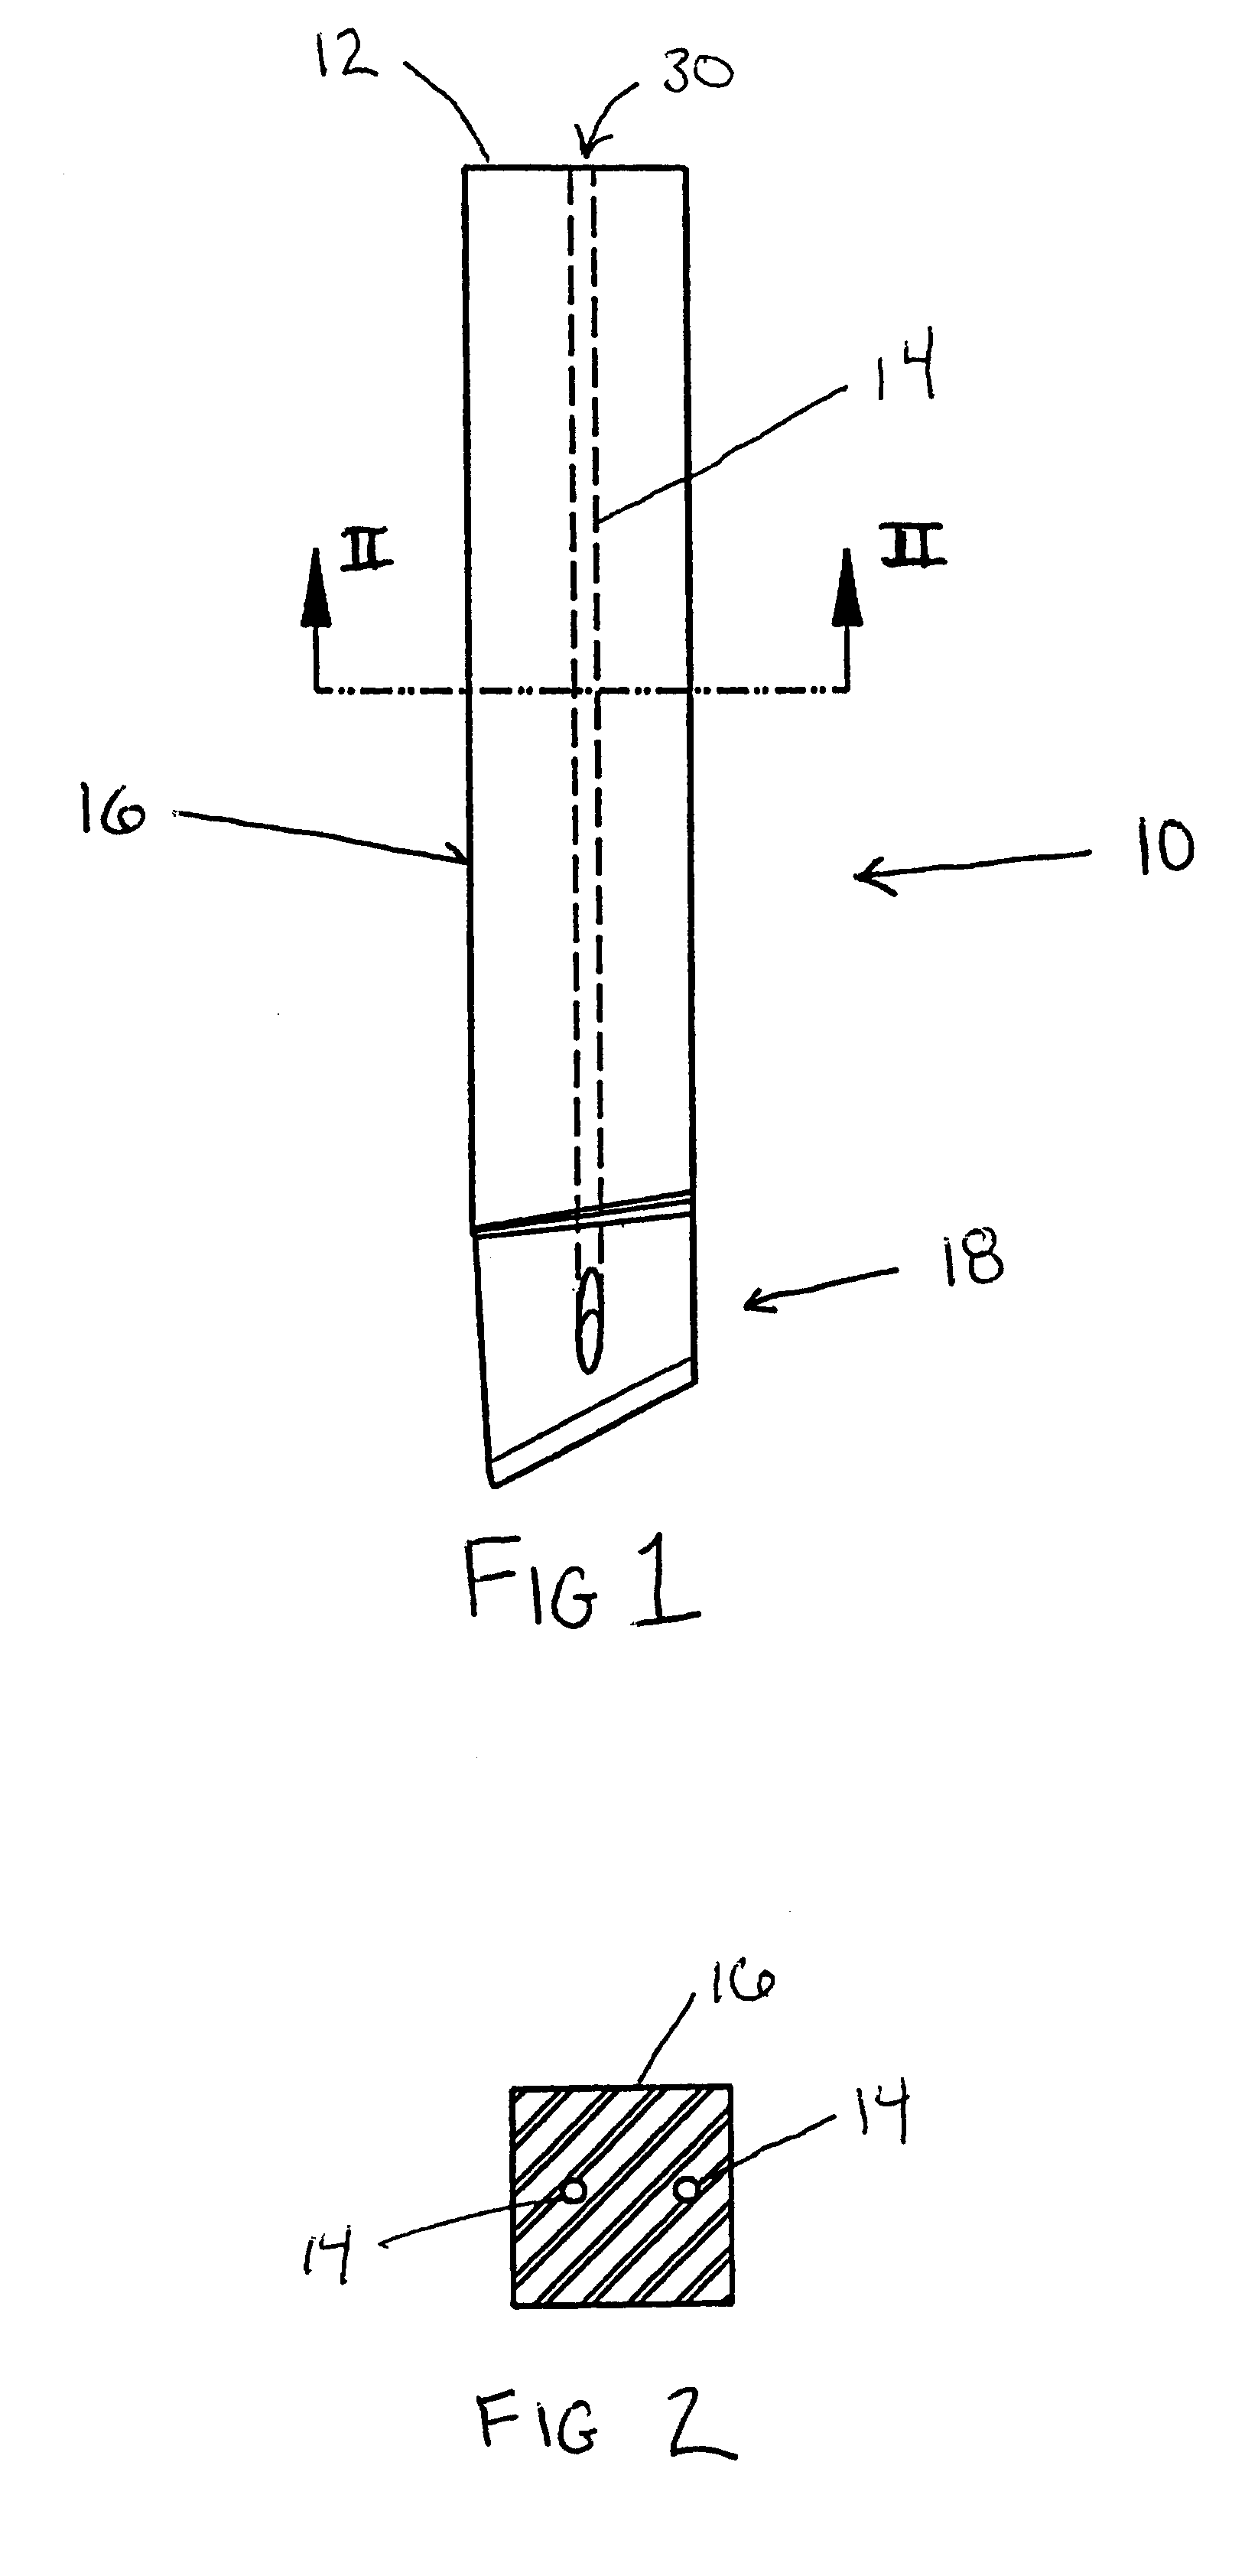 Cutter blade with integral coolant passages